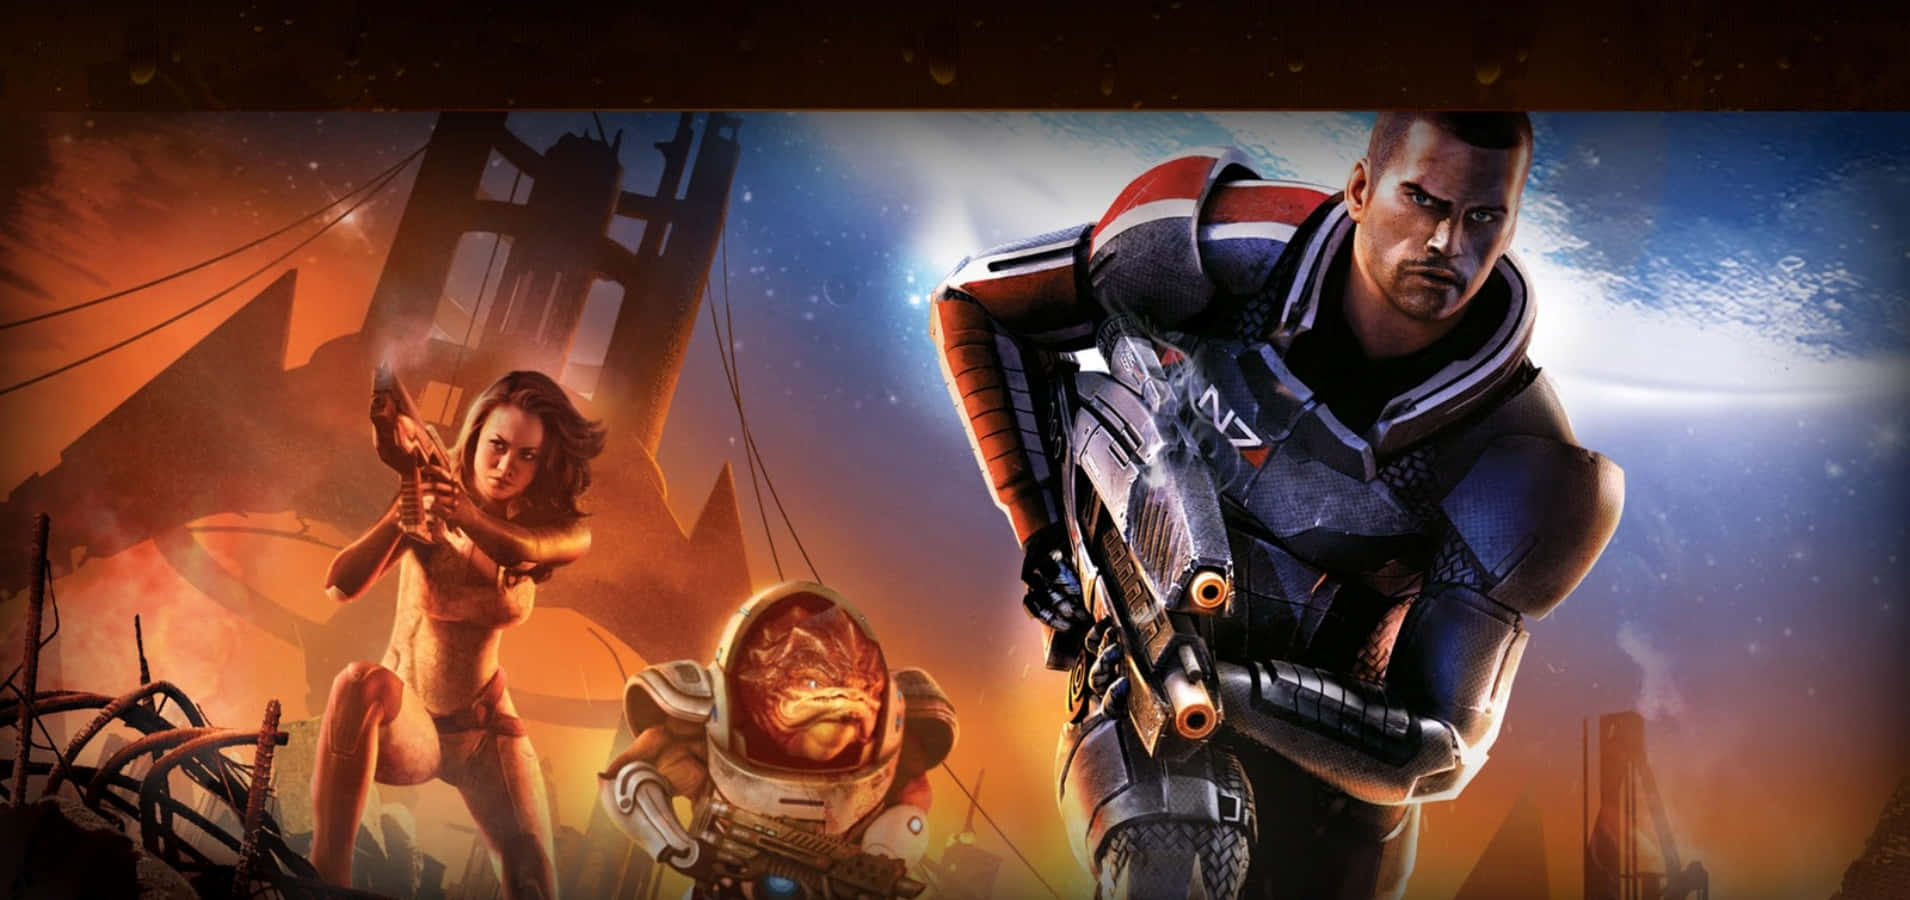 Epic heroes gathered in Mass Effect Universe Wallpaper